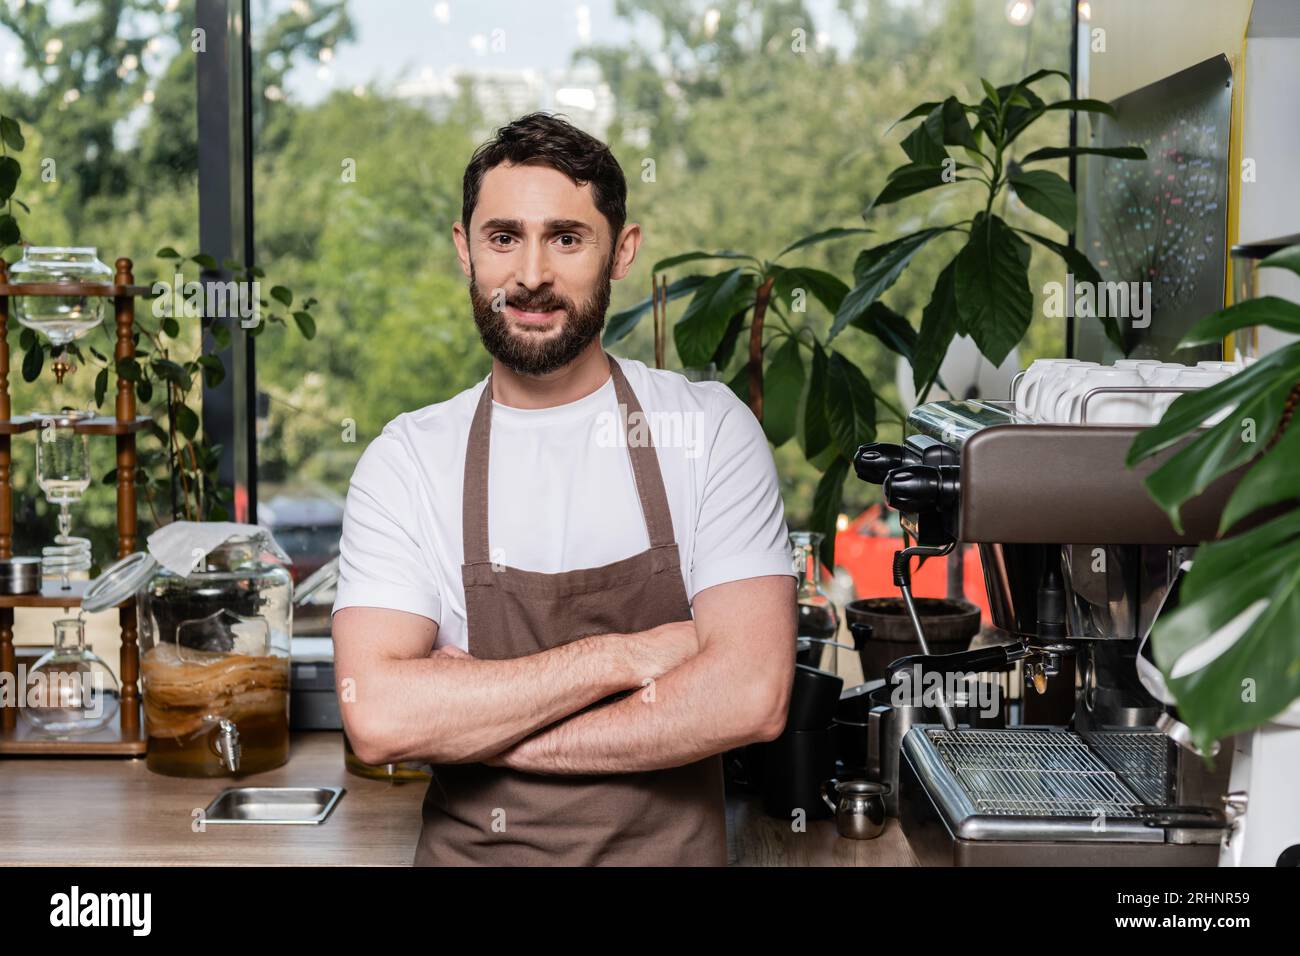 https://c8.alamy.com/comp/2RHNR59/positive-bearded-barista-in-apron-crossing-arms-and-looking-at-camera-while-working-in-coffee-shop-2RHNR59.jpg